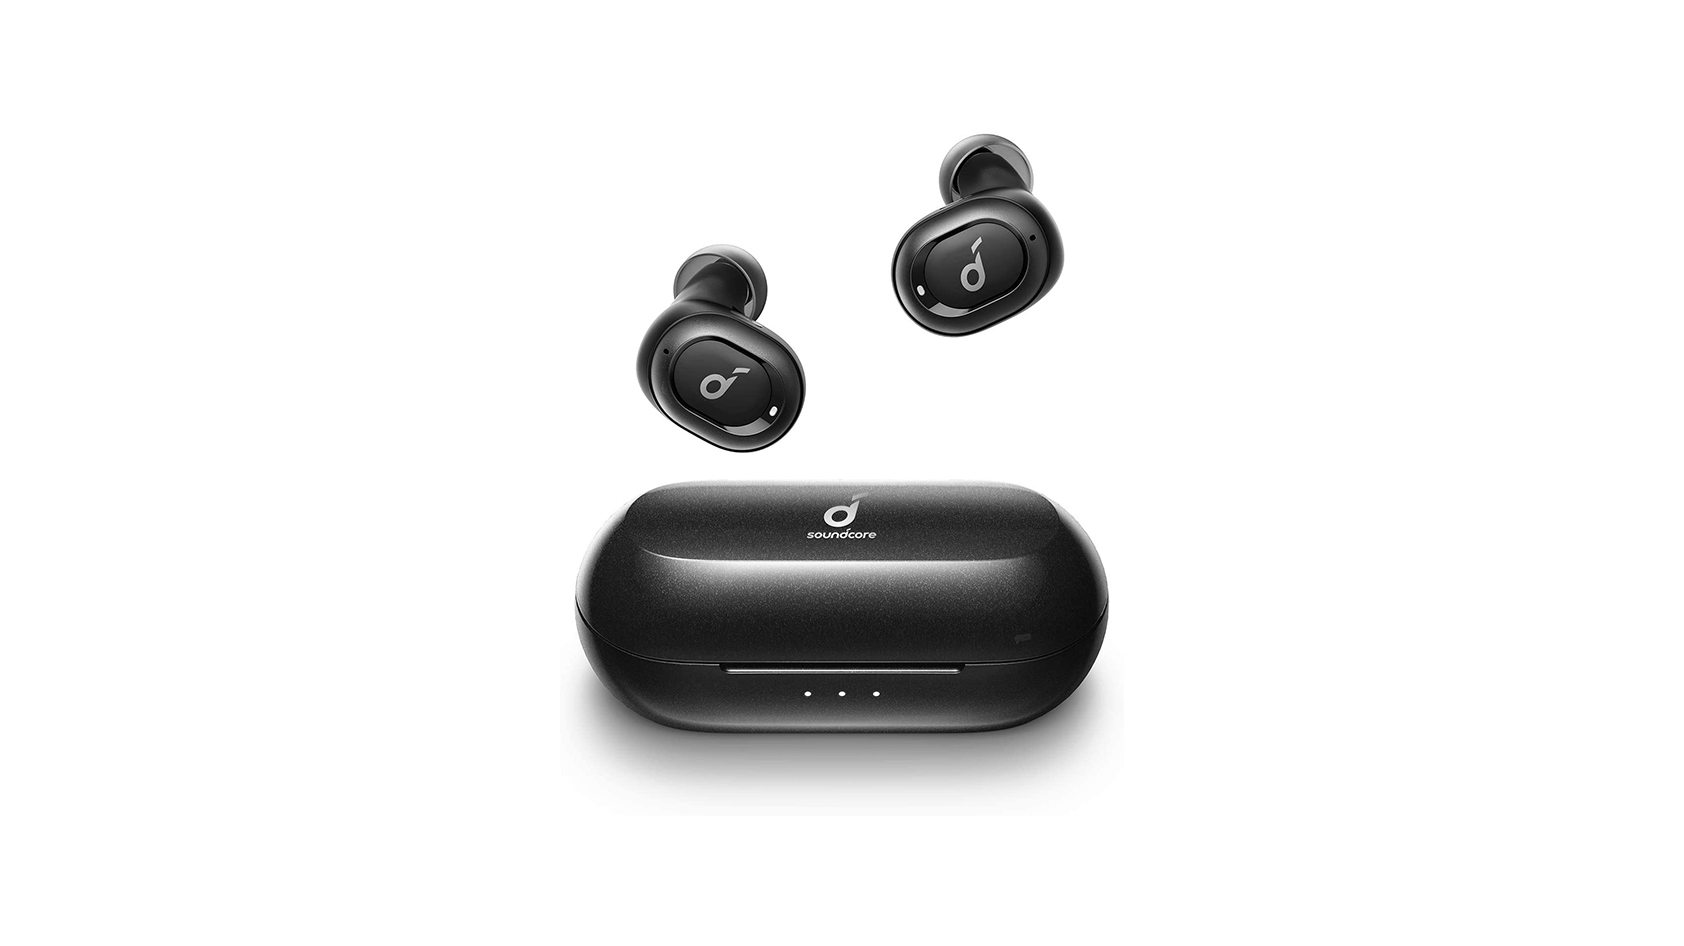 The Anker SoundCore Liberty Neo true wireless earbuds in black against a white background.